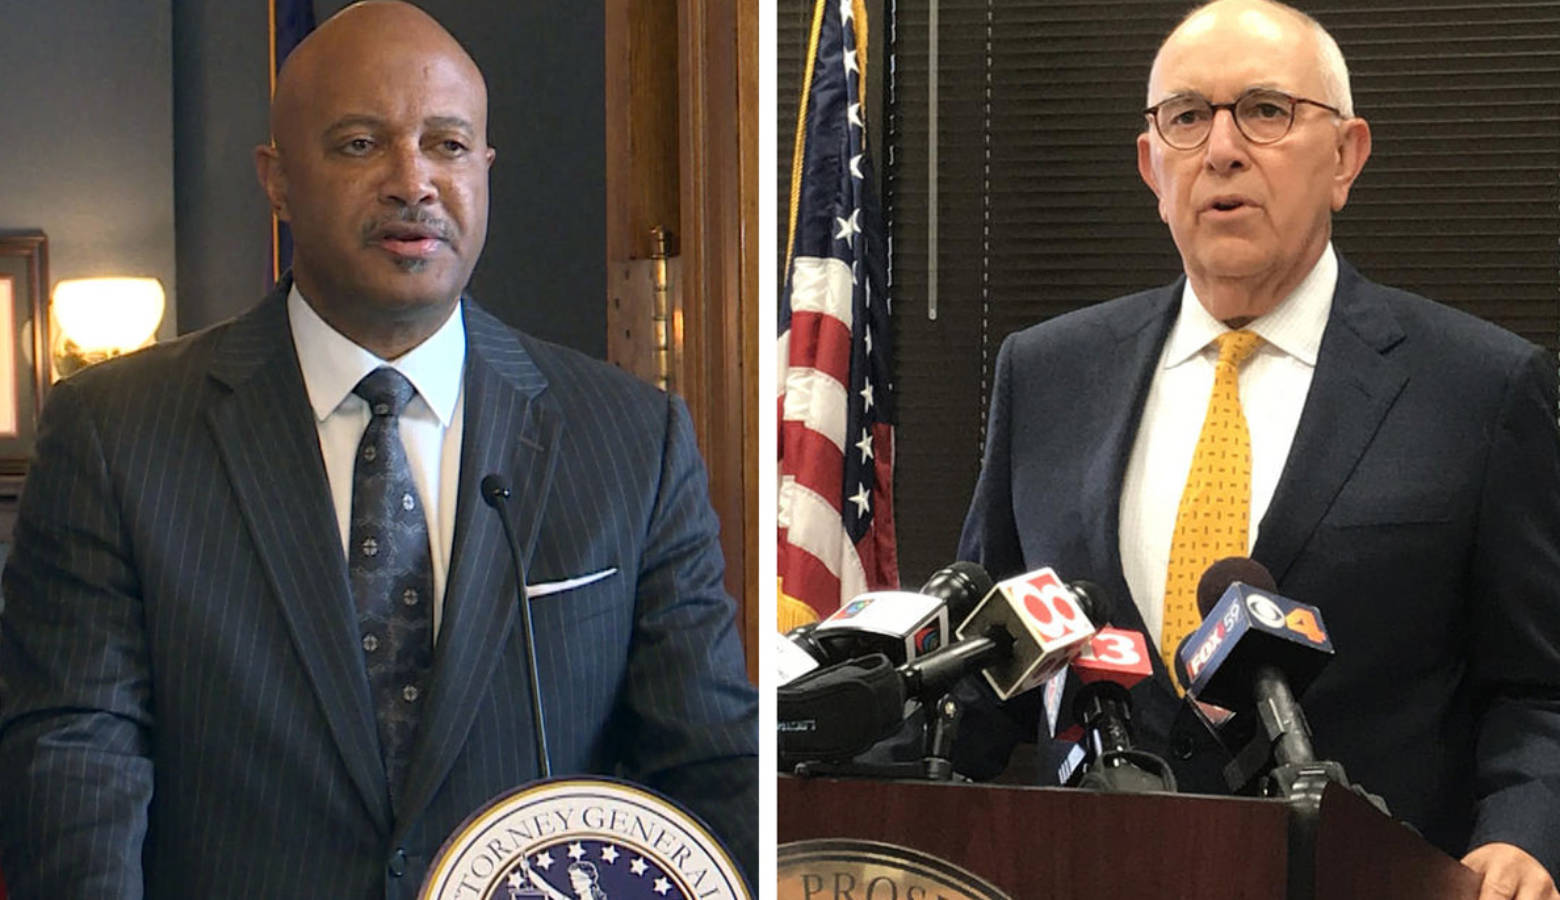 Indiana Attorney General Curtis Hill, left, and Marion County Prosecutor Terry Curry, right, are again clashing over a state abortion lawsuit. (FILE PHOTOS: Lauren Chapman and Brandon Smith/IPB News)